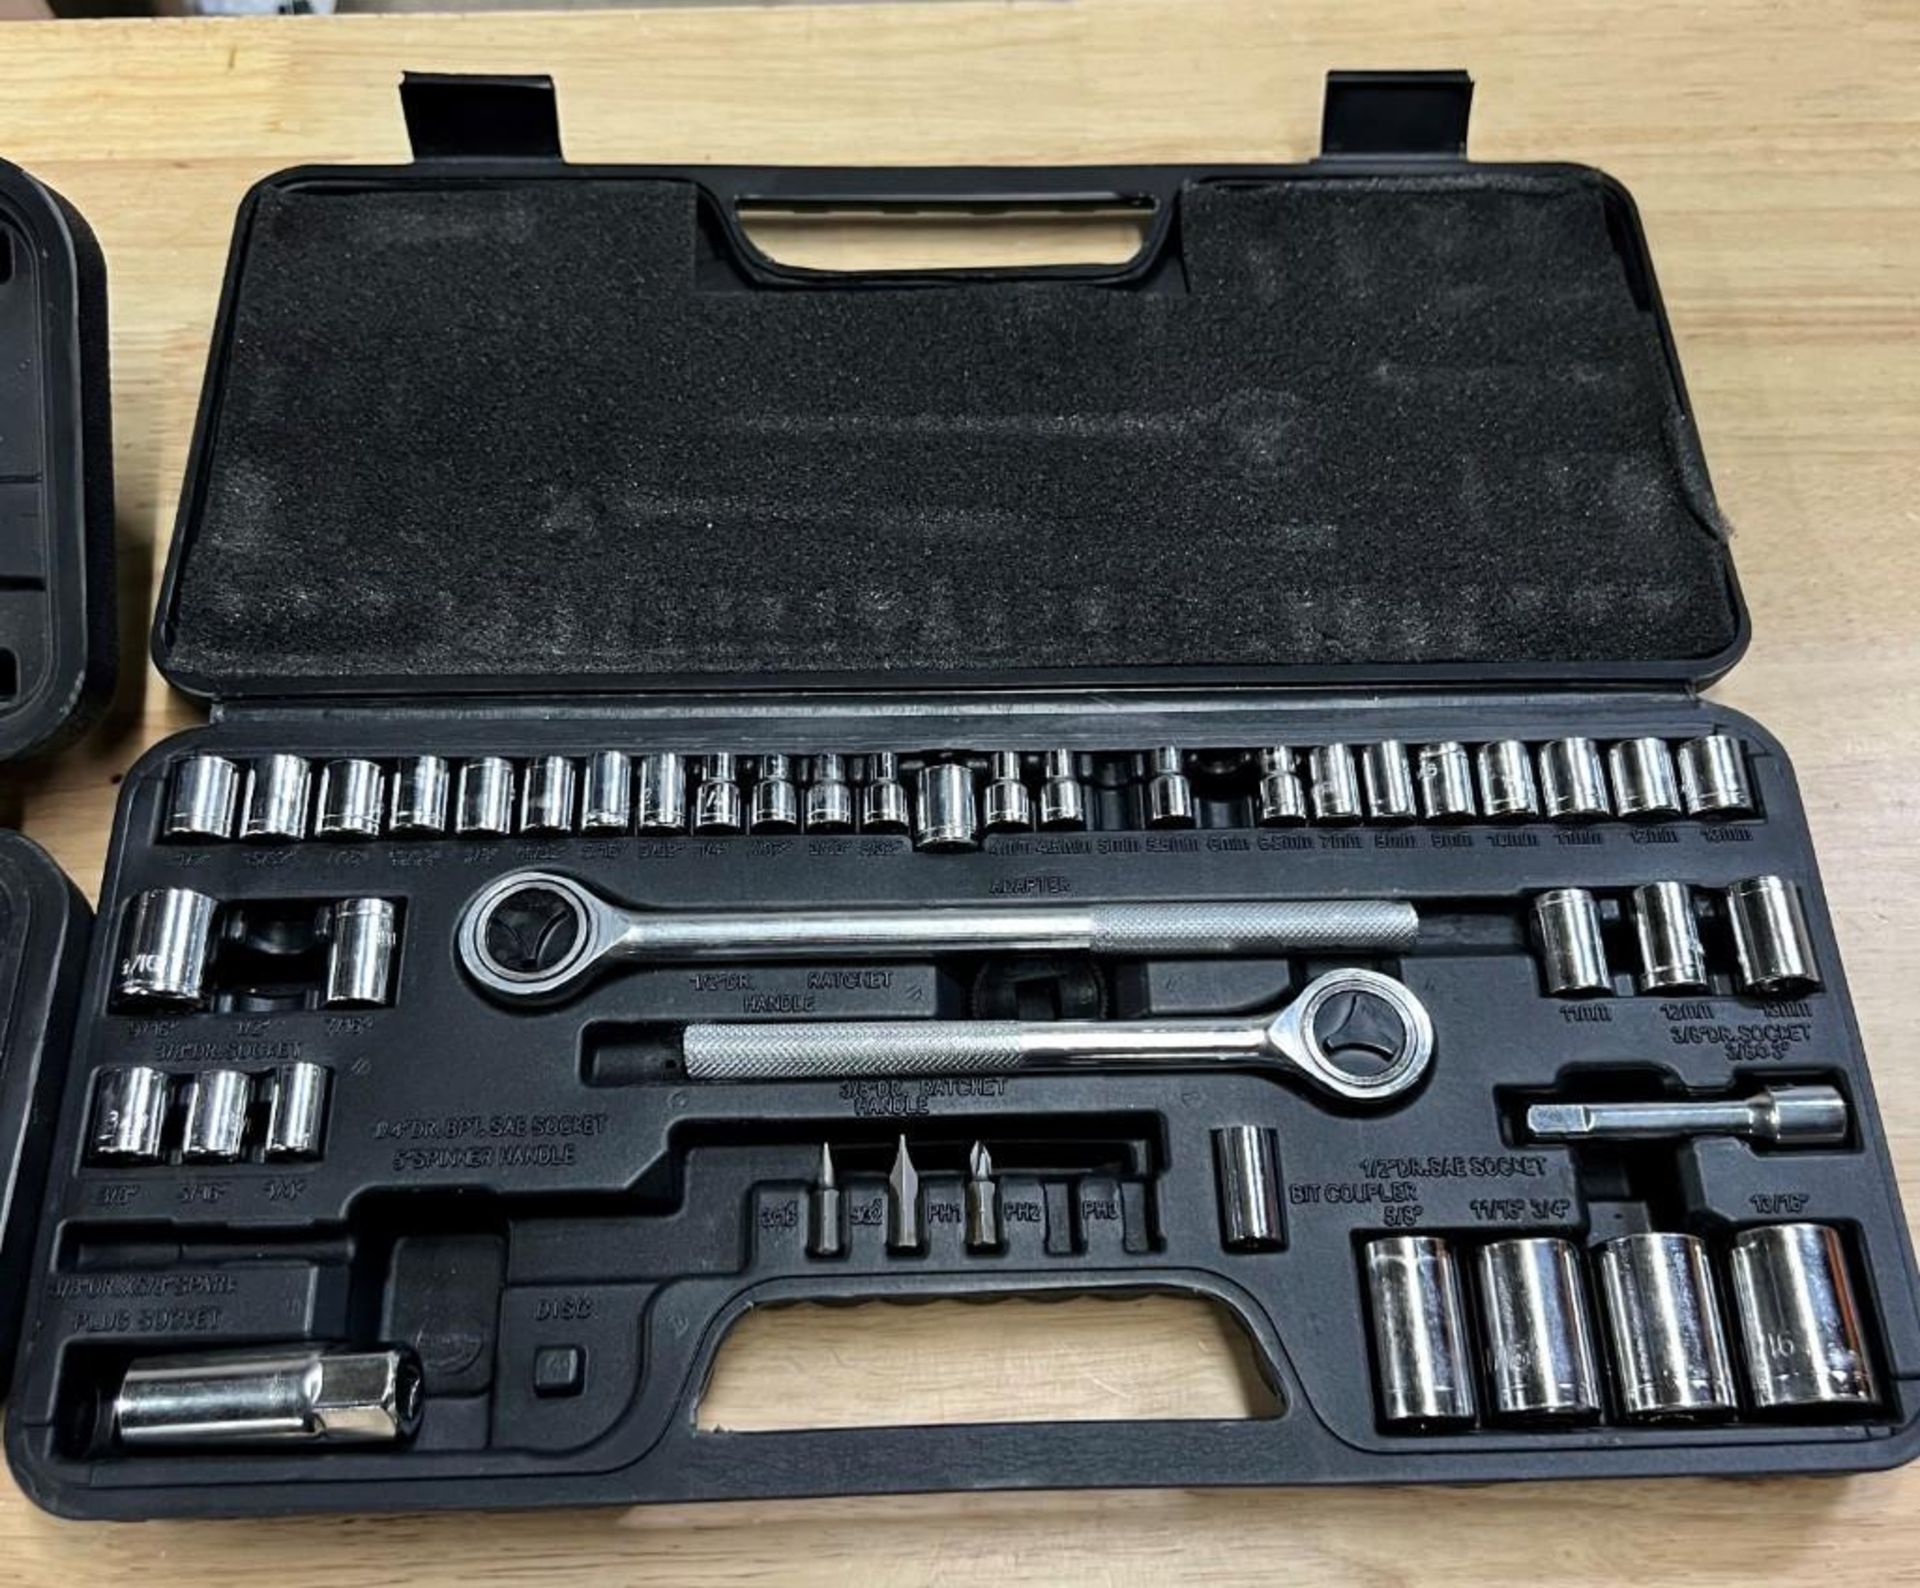 Lot Of Tools Consisting Of: (3) tap & die sets, (2) socket sets, metric wrench set, (2) Performax to - Image 6 of 12